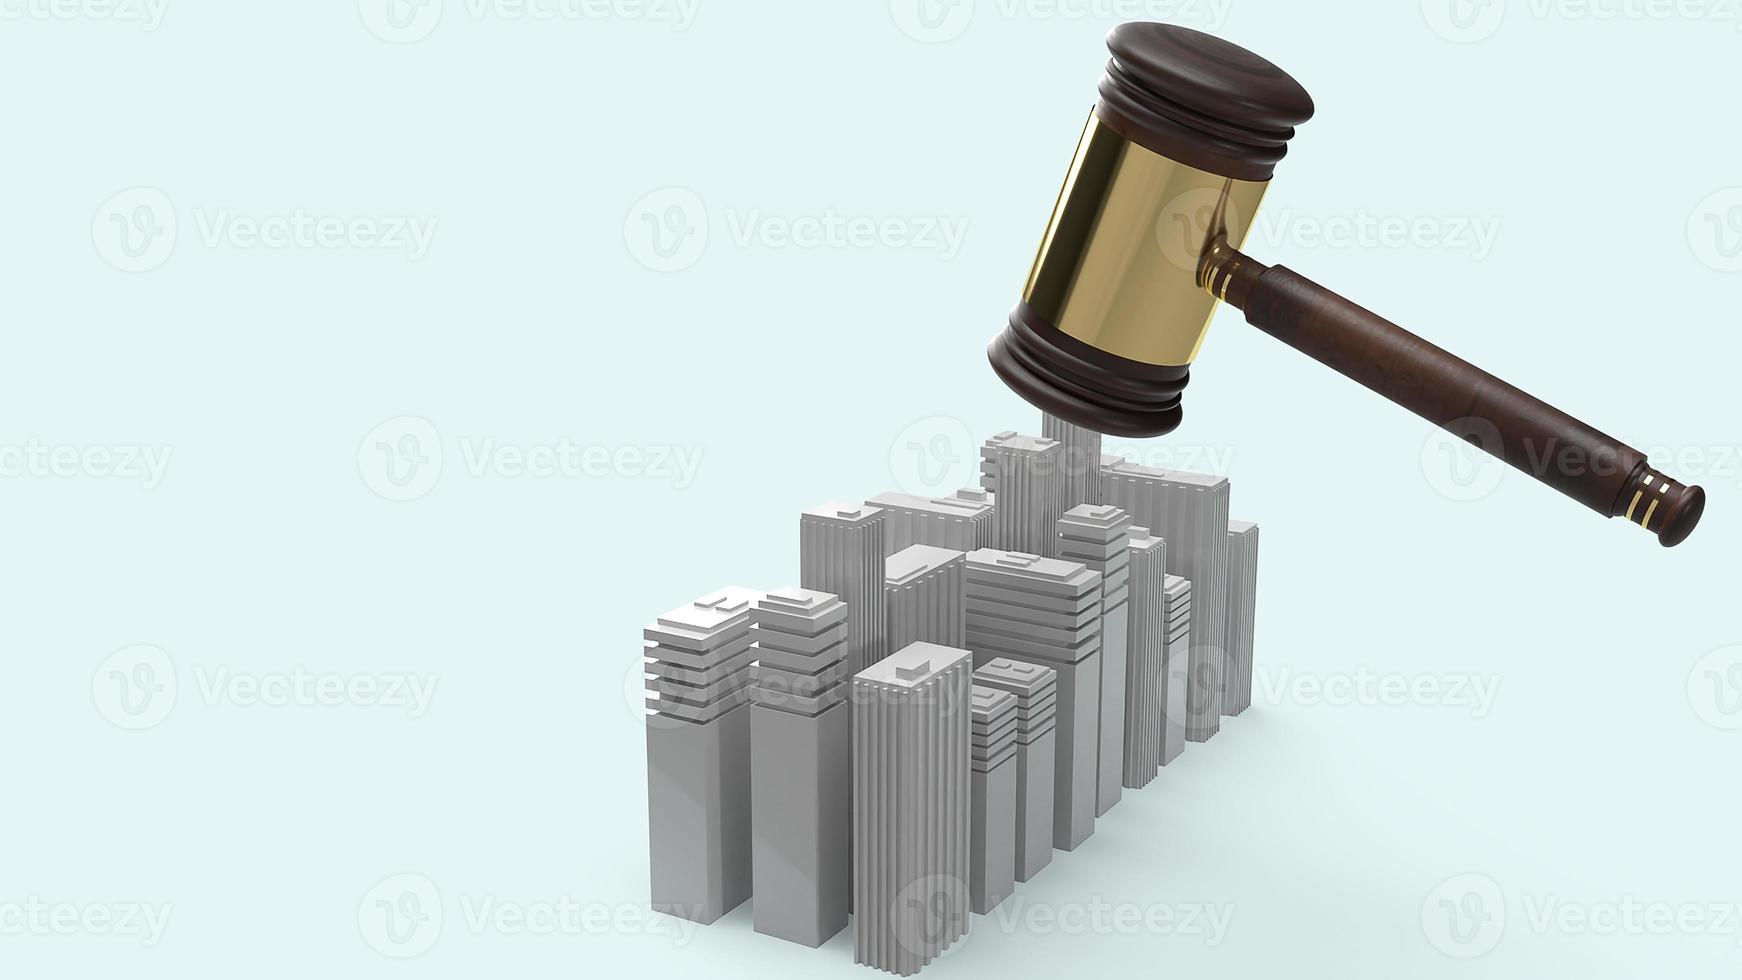 Building and justice hammer image for property law concept 3d rendering. photo